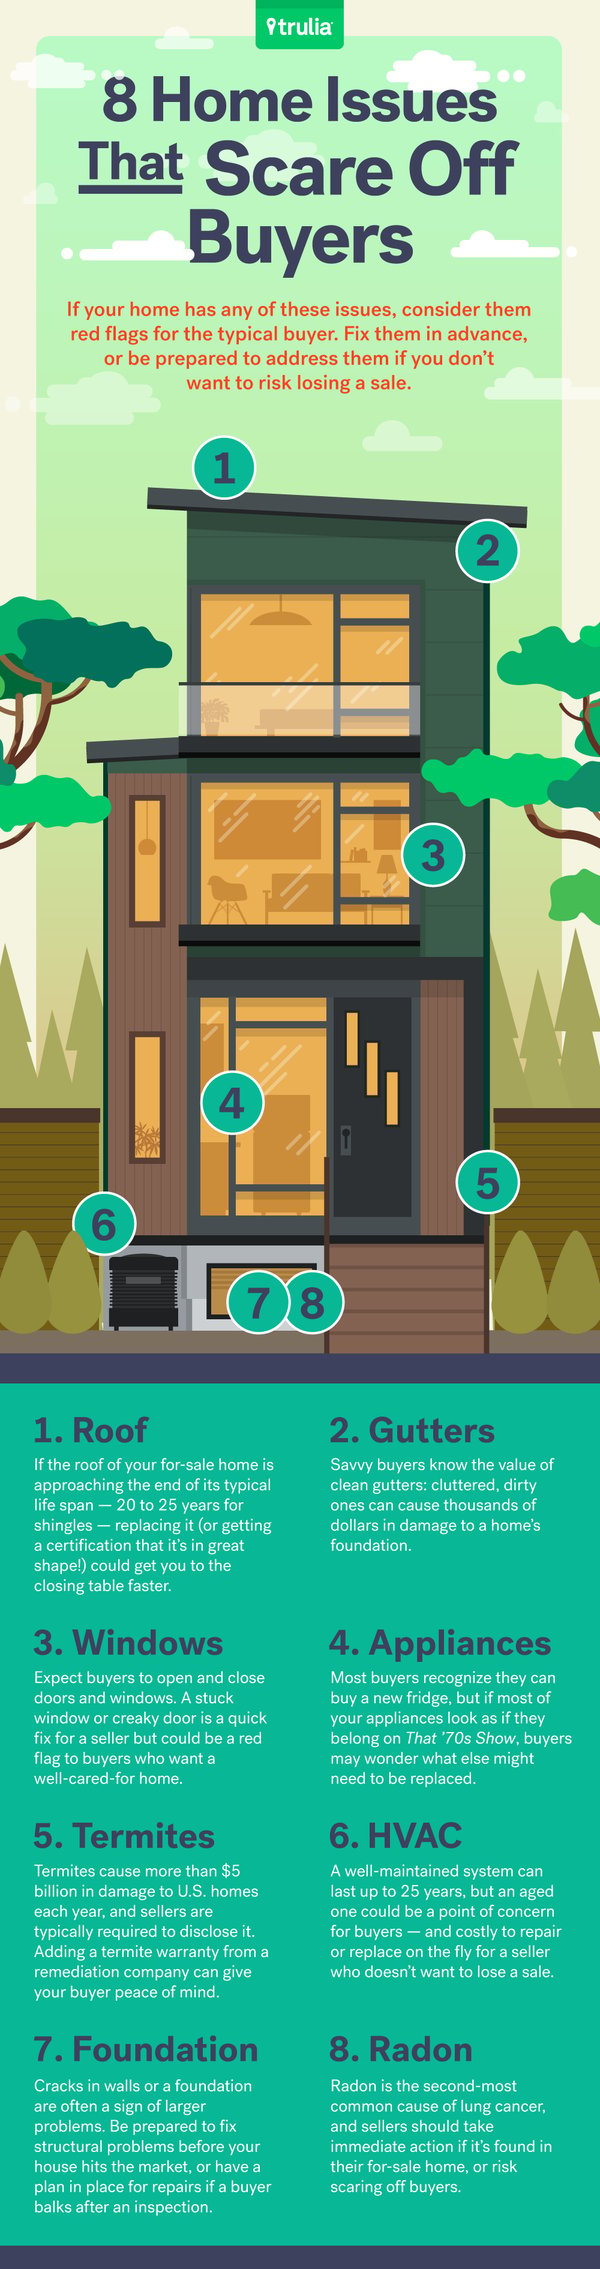 8-Home-Issues-That-Scare-Off-Buyers-11-10-INFOGRAPHIC-1.png